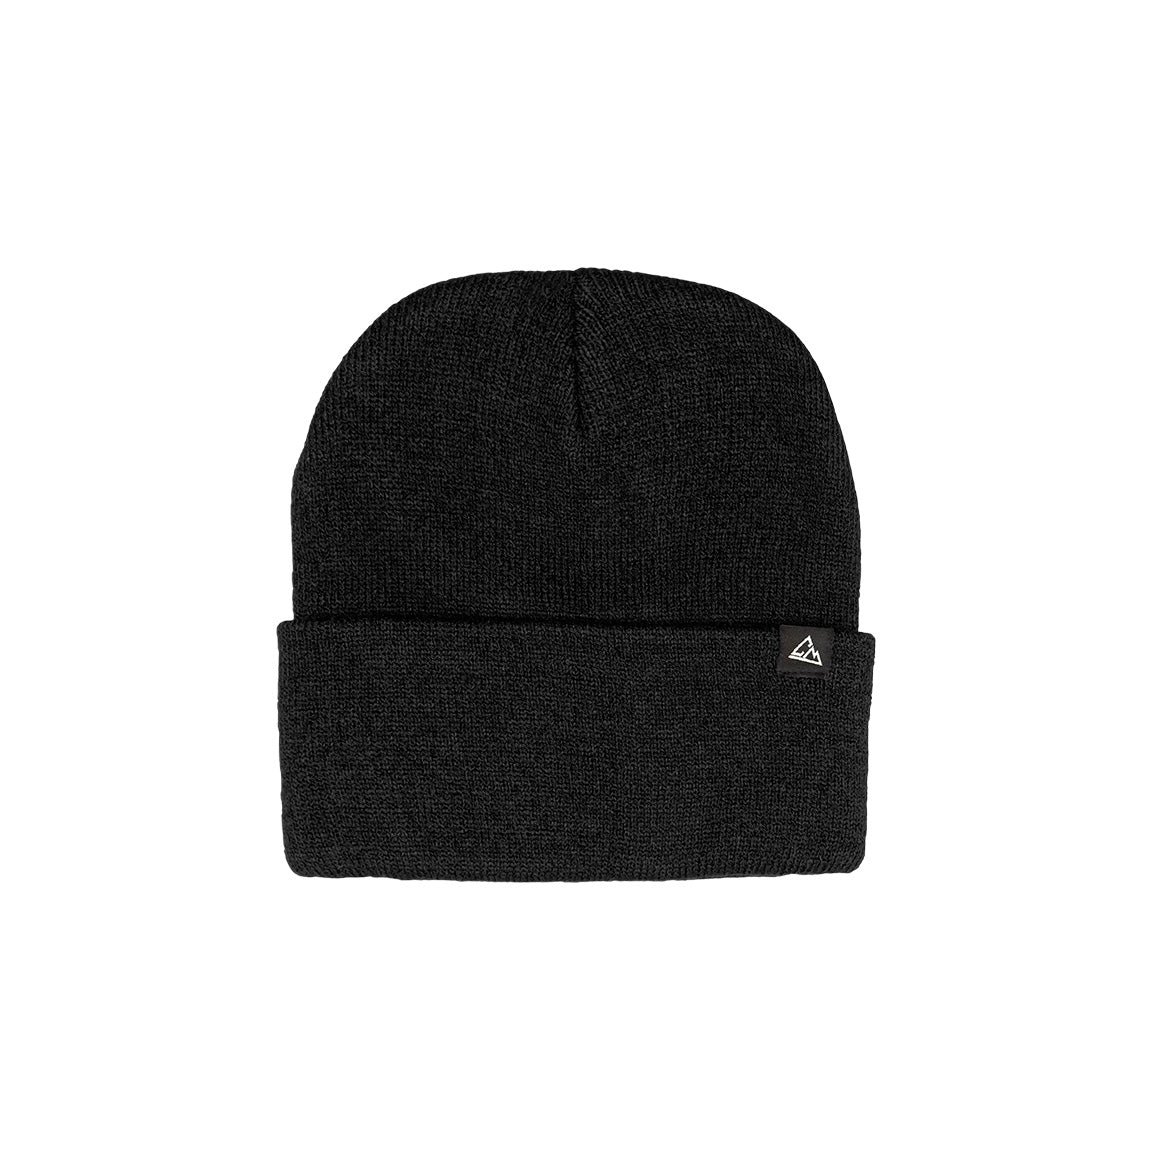 A simple black foldable beanie with a ribbed texture and a small triangular logo on the fold.